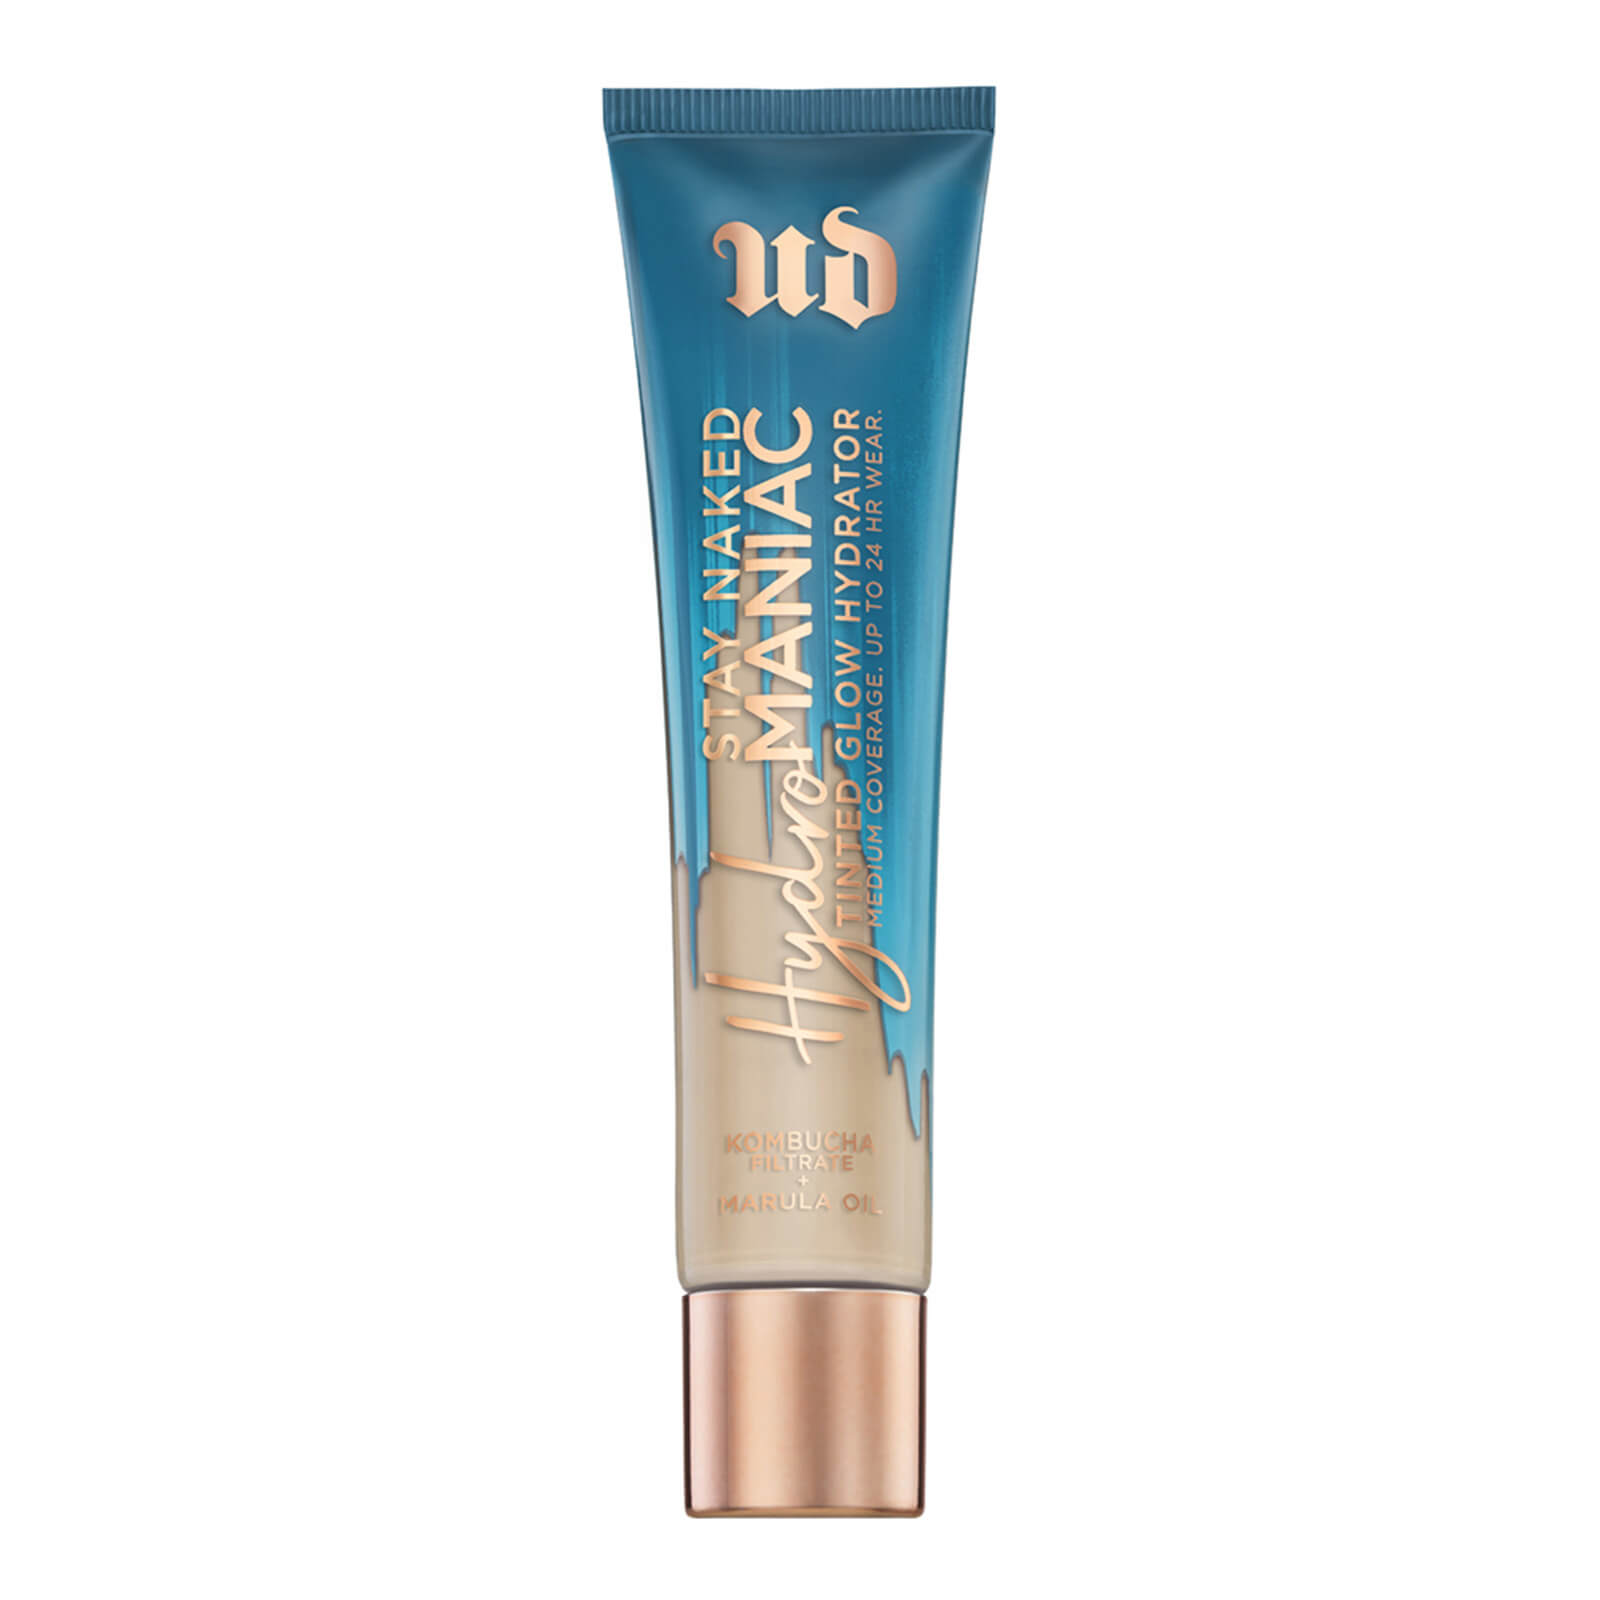 Image of Urban Decay Stay Naked Hydromaniac Tinted Glow Hydrator 35ml (Various Shades) - 20